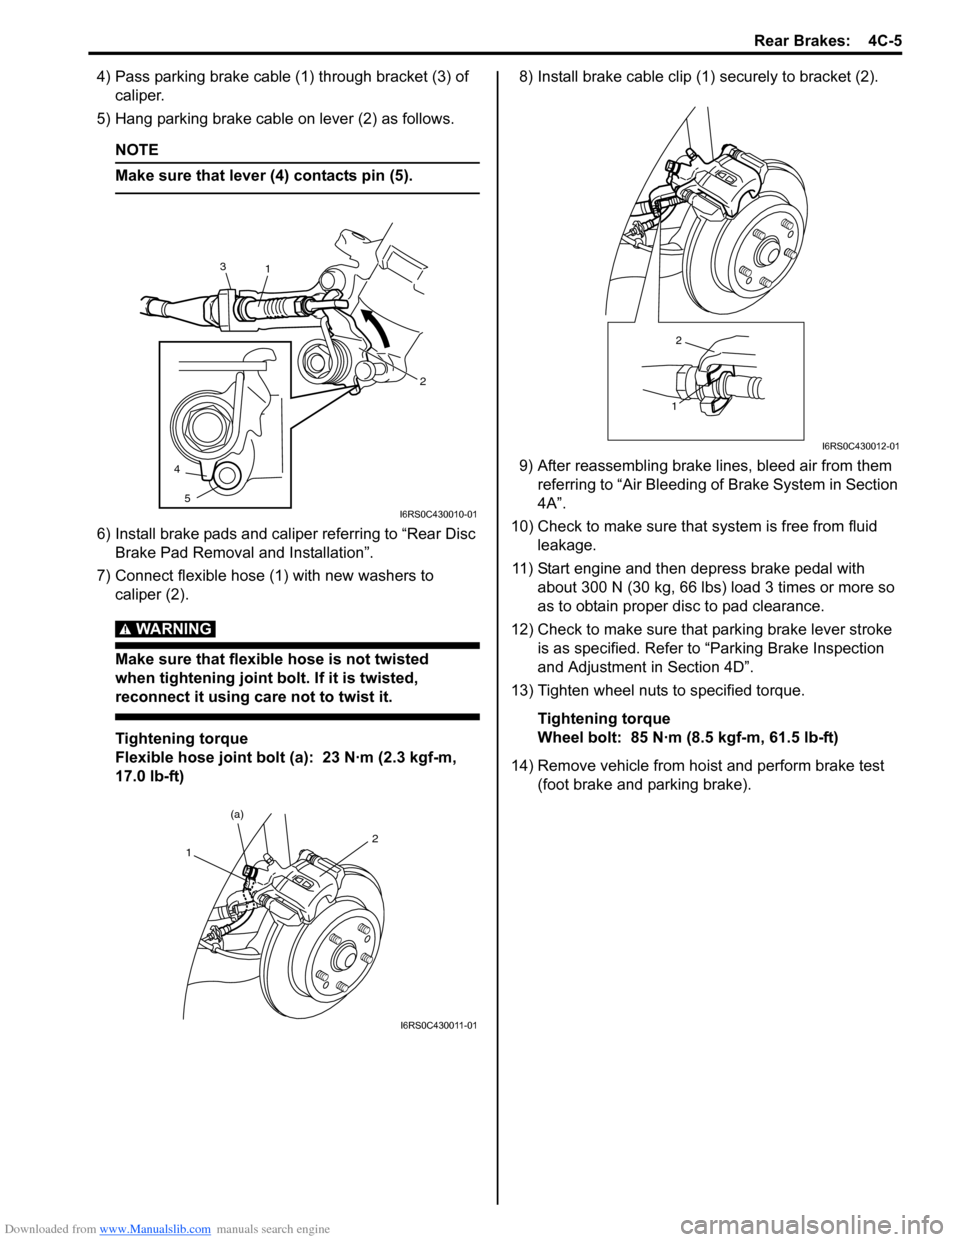 SUZUKI SWIFT 2008 2.G Service Owners Guide Downloaded from www.Manualslib.com manuals search engine Rear Brakes:  4C-5
4) Pass parking brake cable (1) through bracket (3) of caliper.
5) Hang parking brake cable on lever (2) as follows.
NOTE
Ma